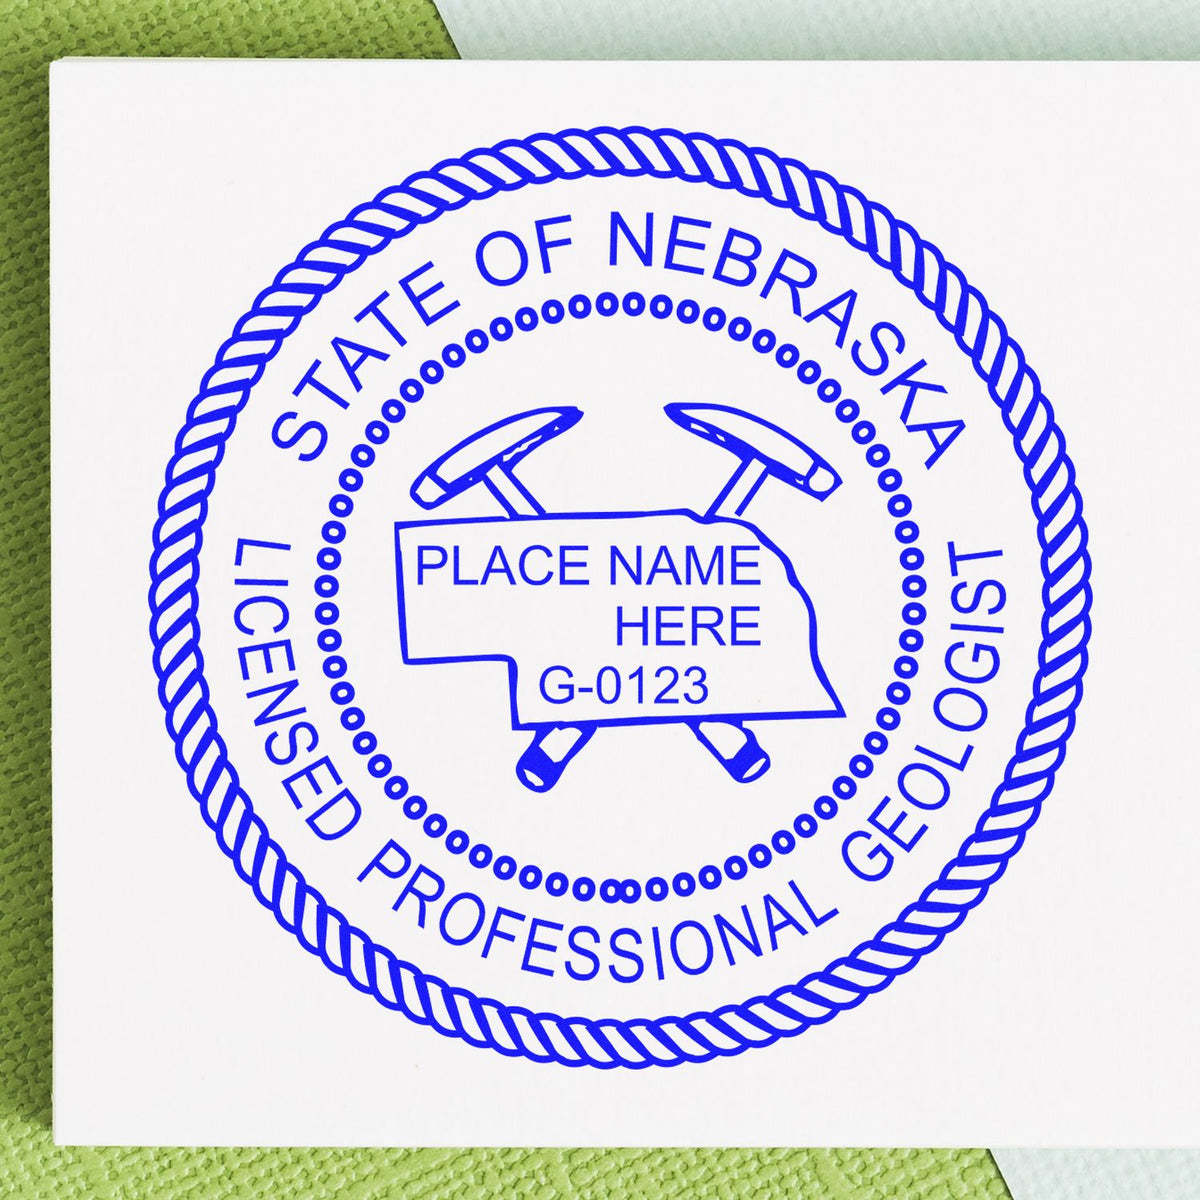 An alternative view of the Nebraska Professional Geologist Seal Stamp stamped on a sheet of paper showing the image in use